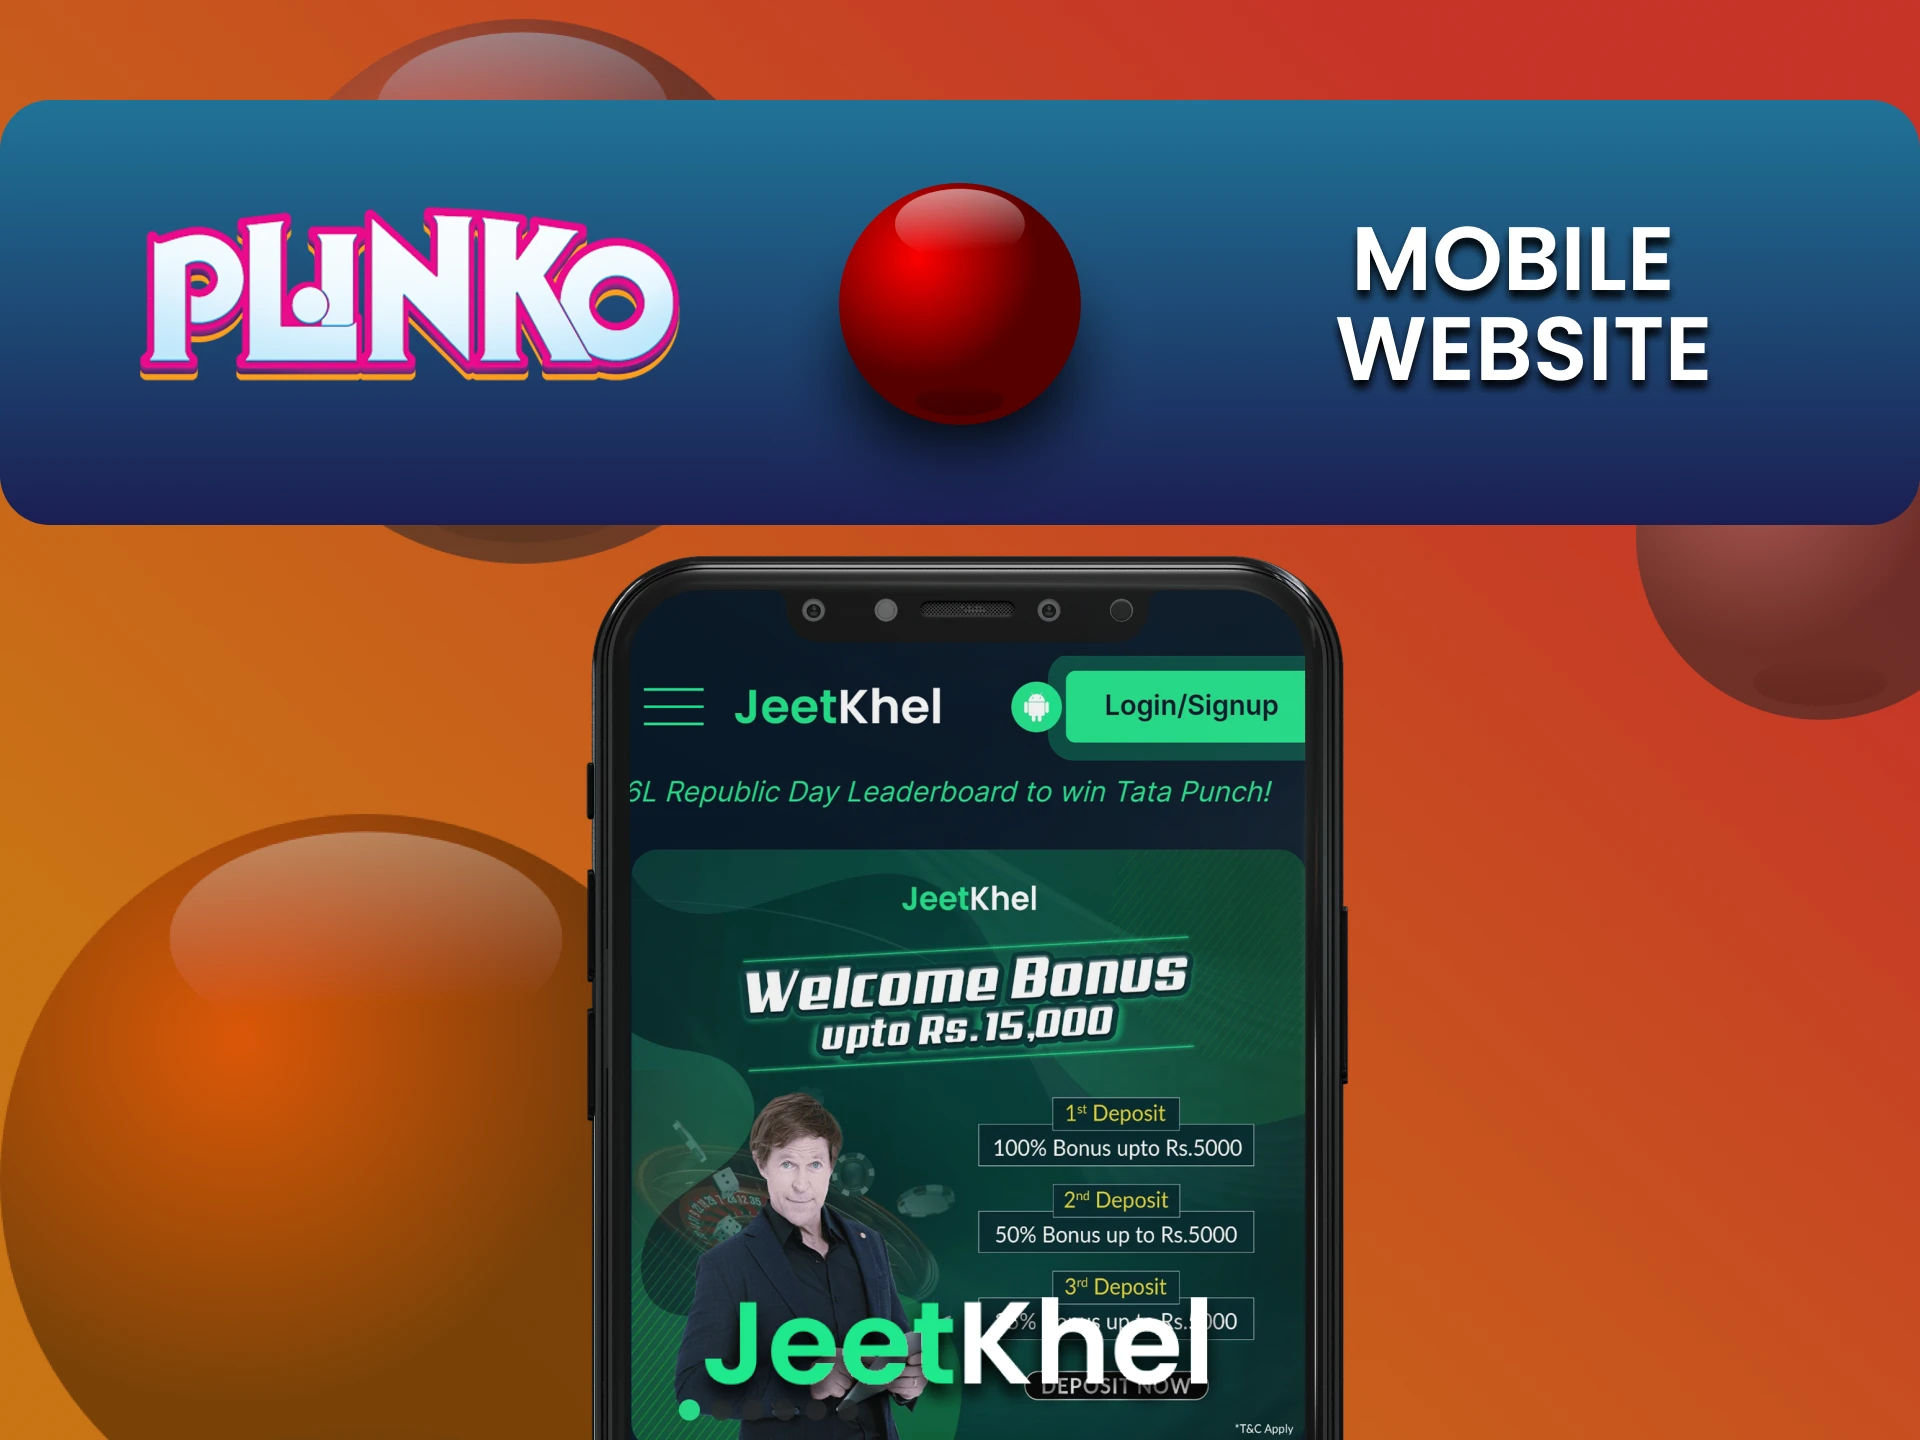 You can play Plinko on the mobile version of the JeetKhel website.